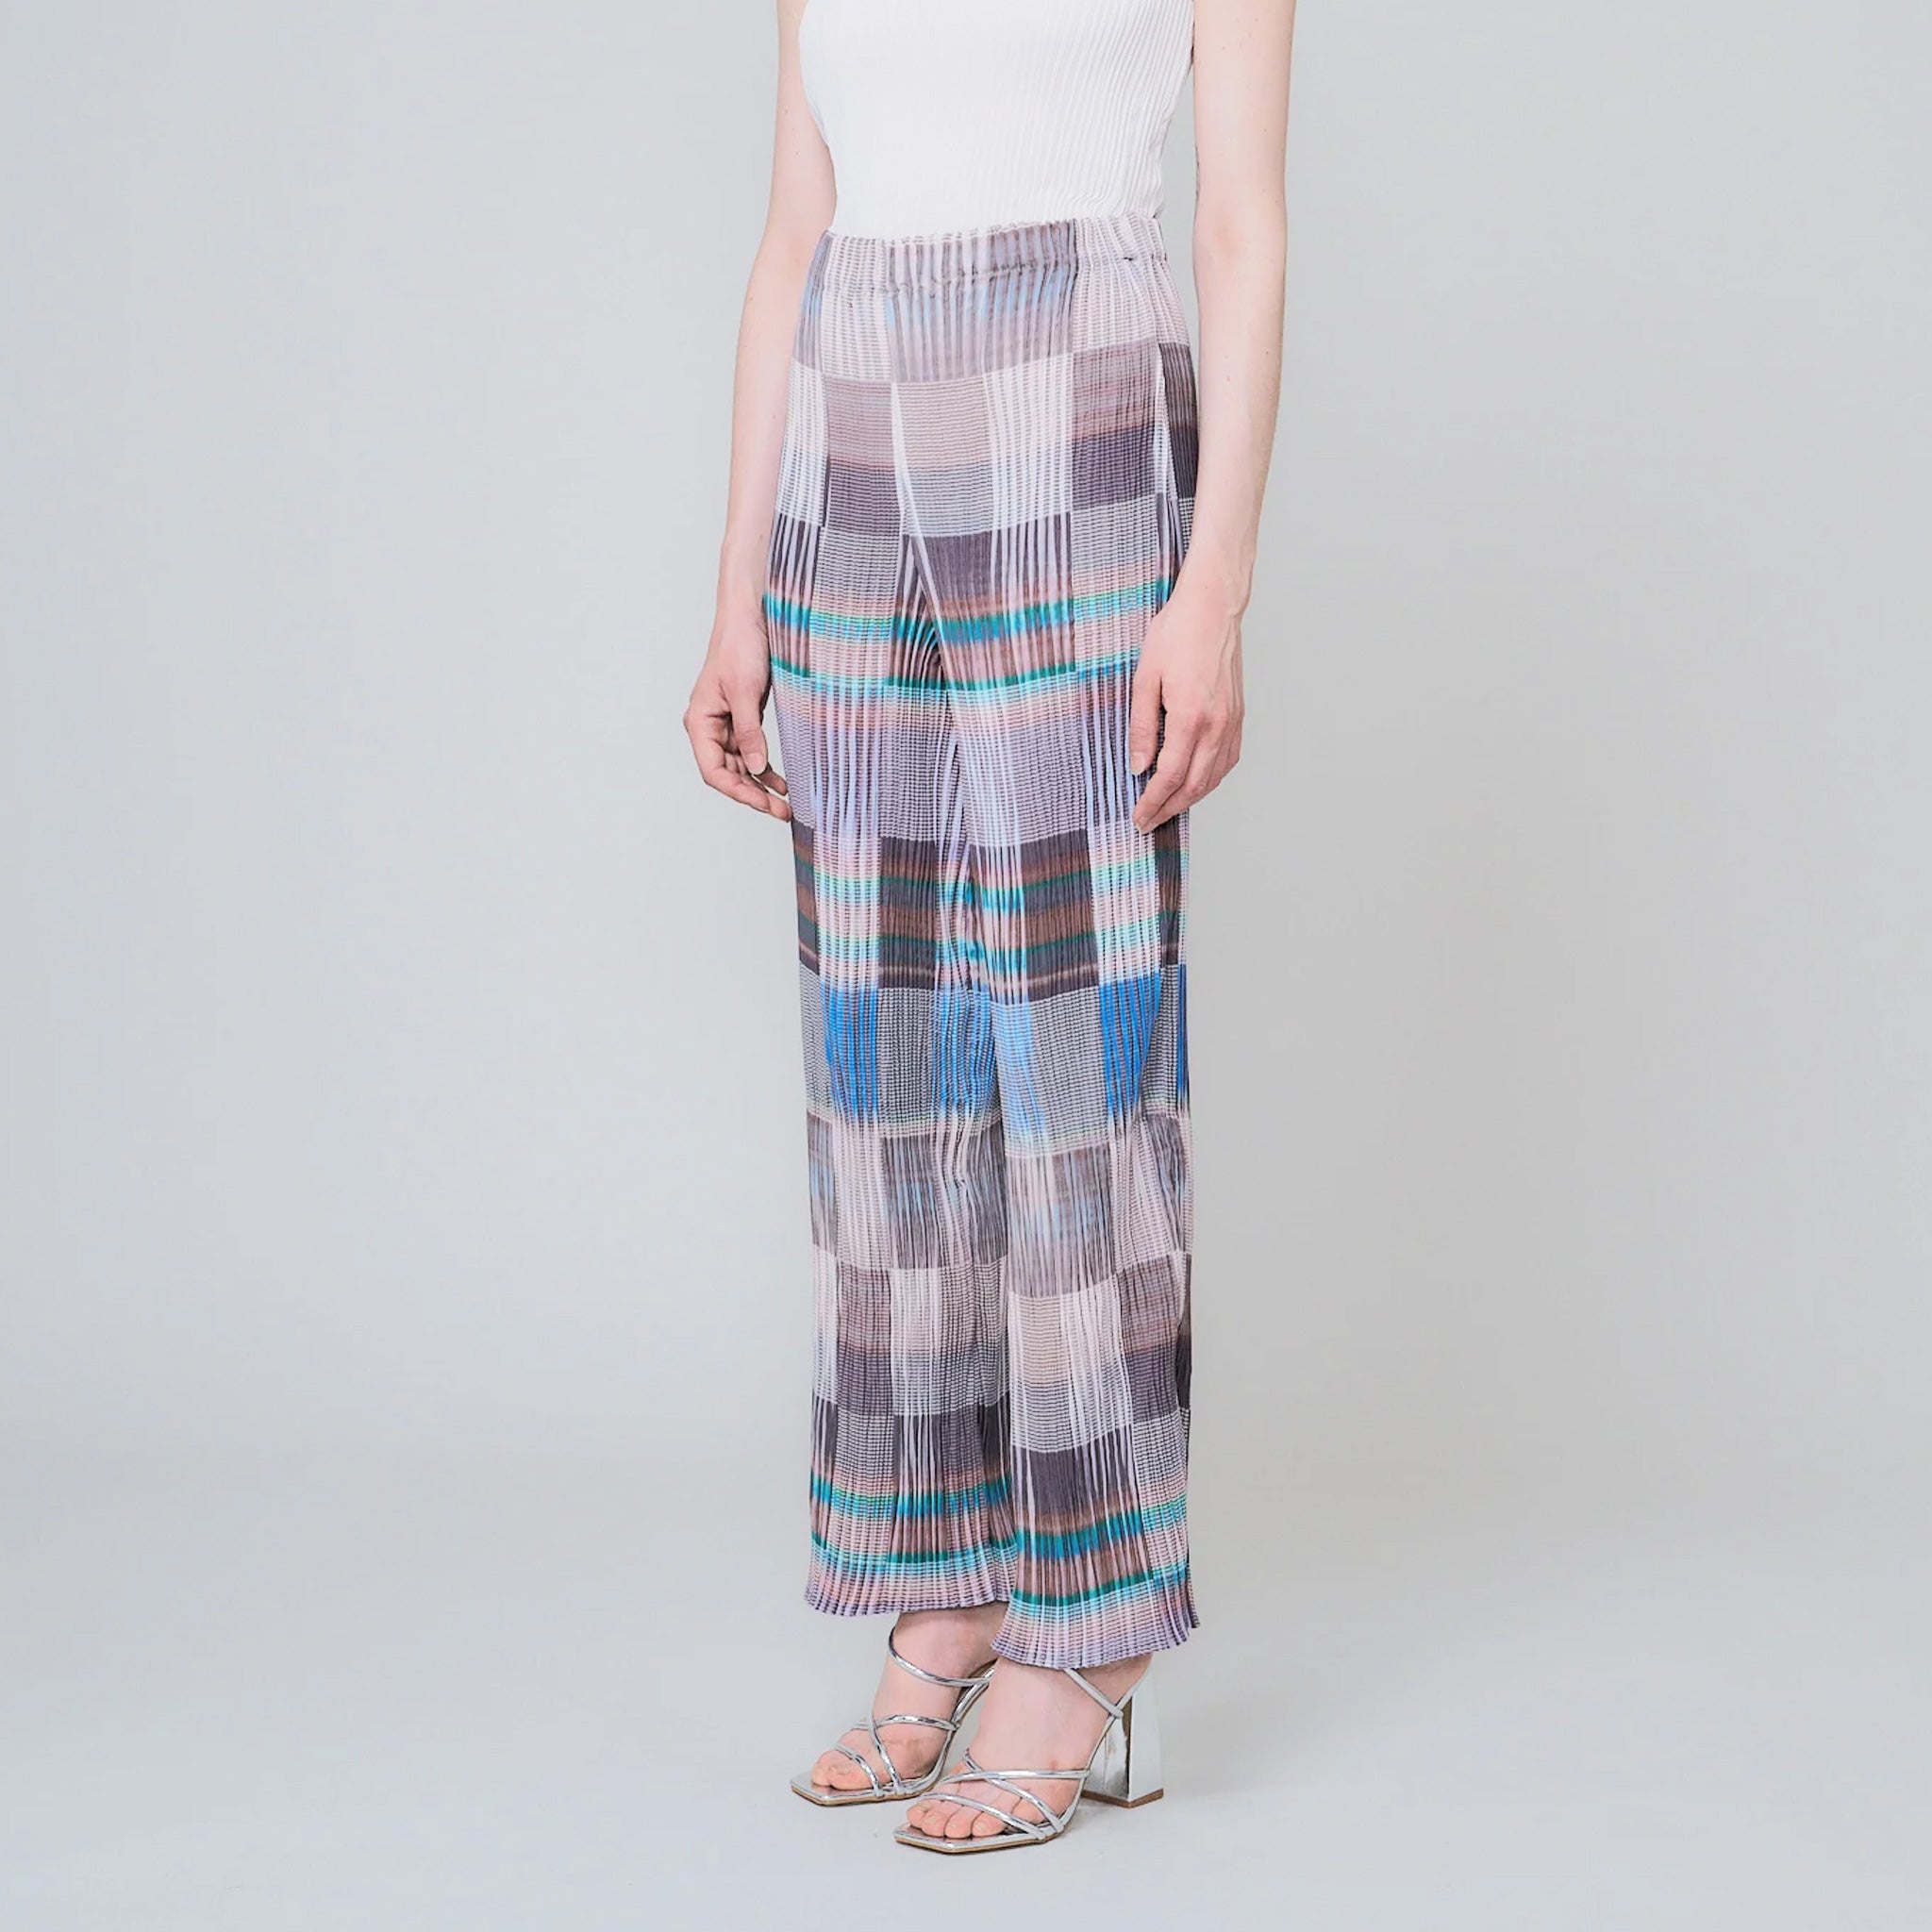 Pleated high waist trousers with a gridded graphic pattern in greys, whites, and blues - angled view on model.